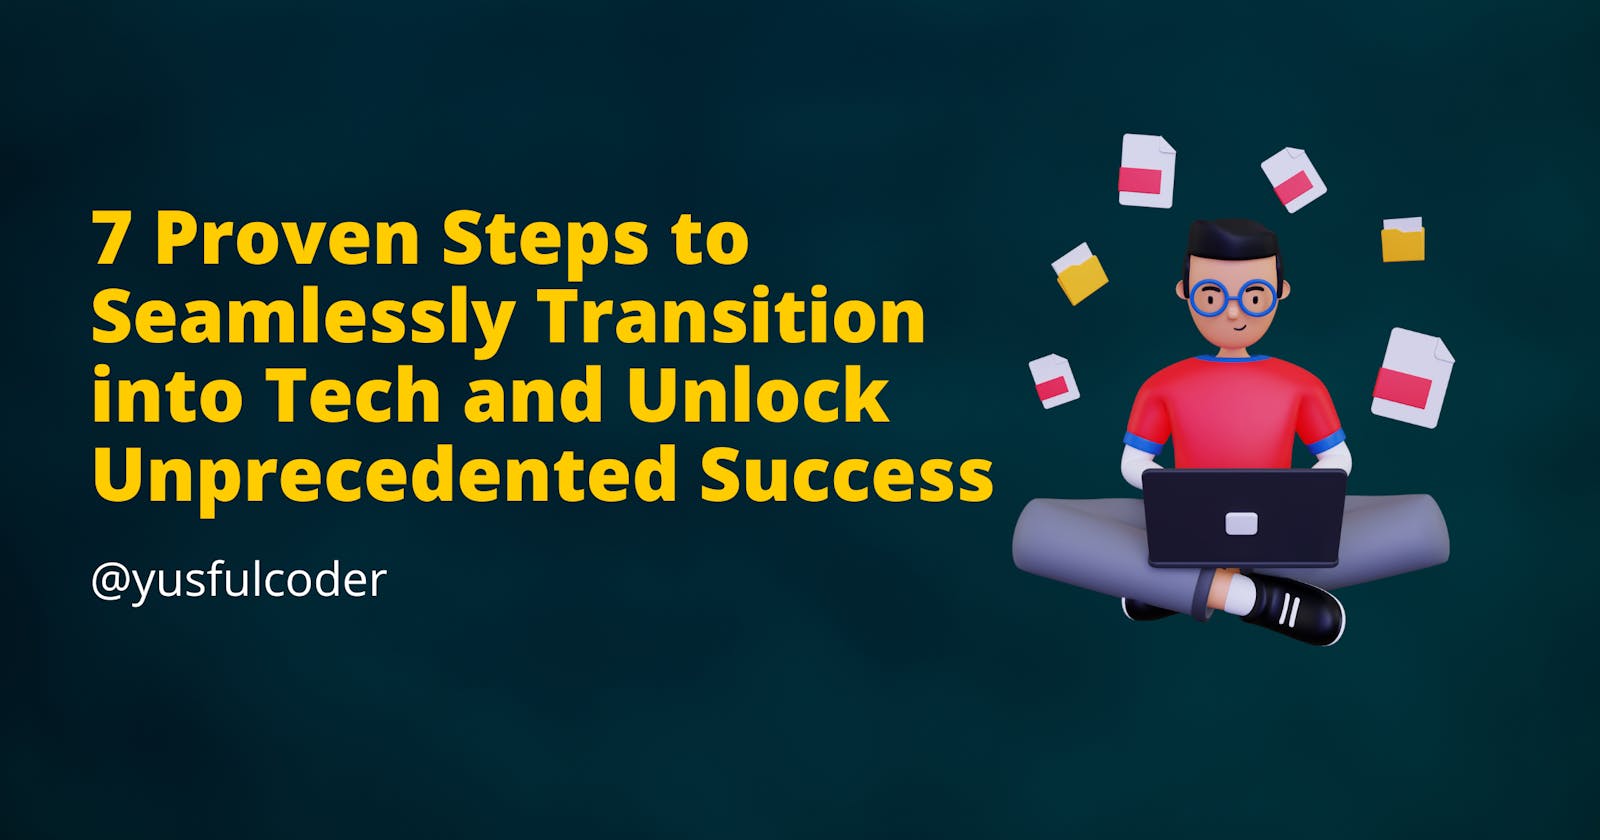 7 Proven Steps to Seamlessly Transition into Tech and Unlock Unprecedented Success